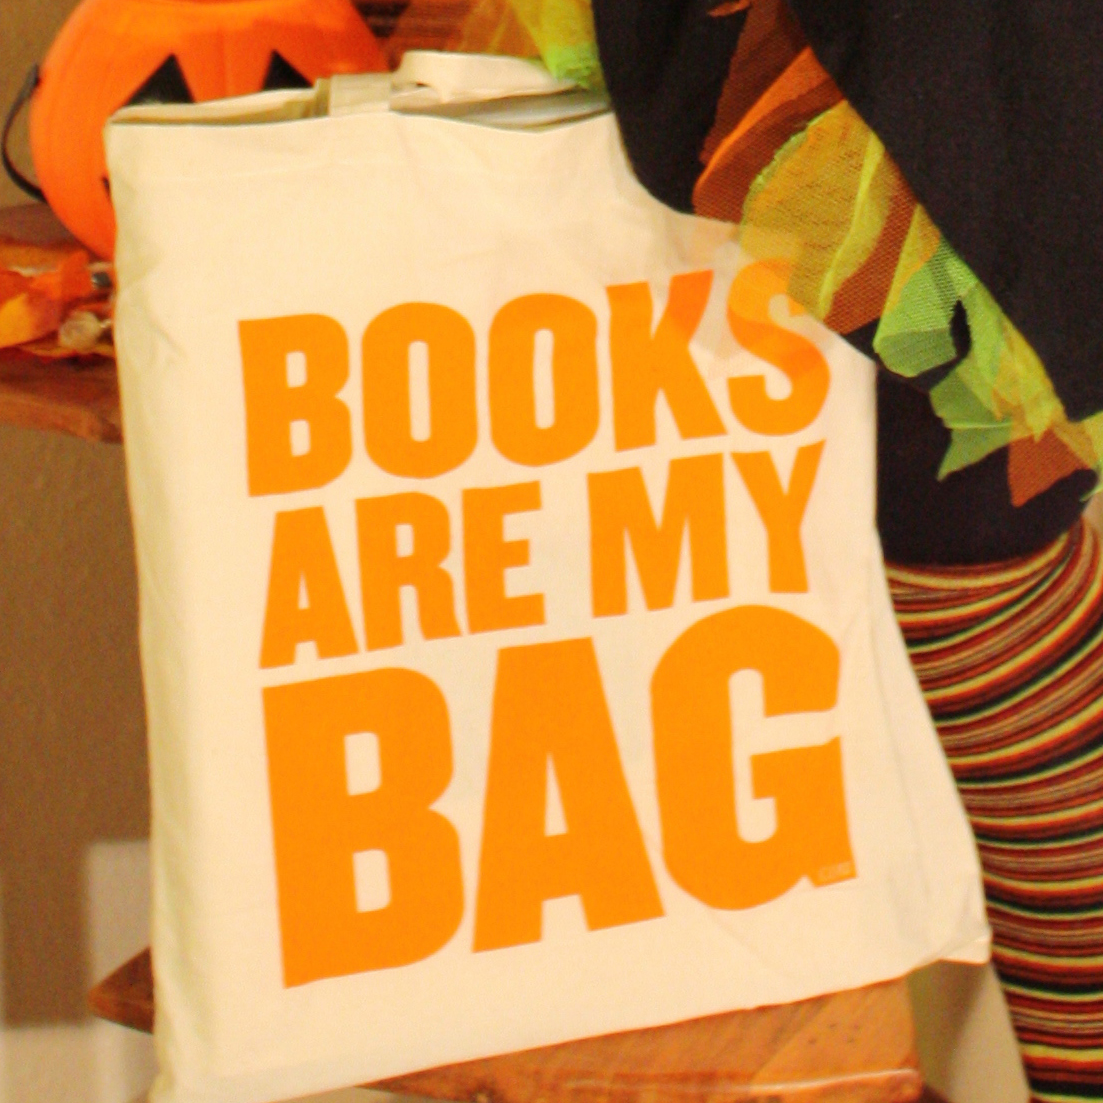 BOOKS ARE MY BAG